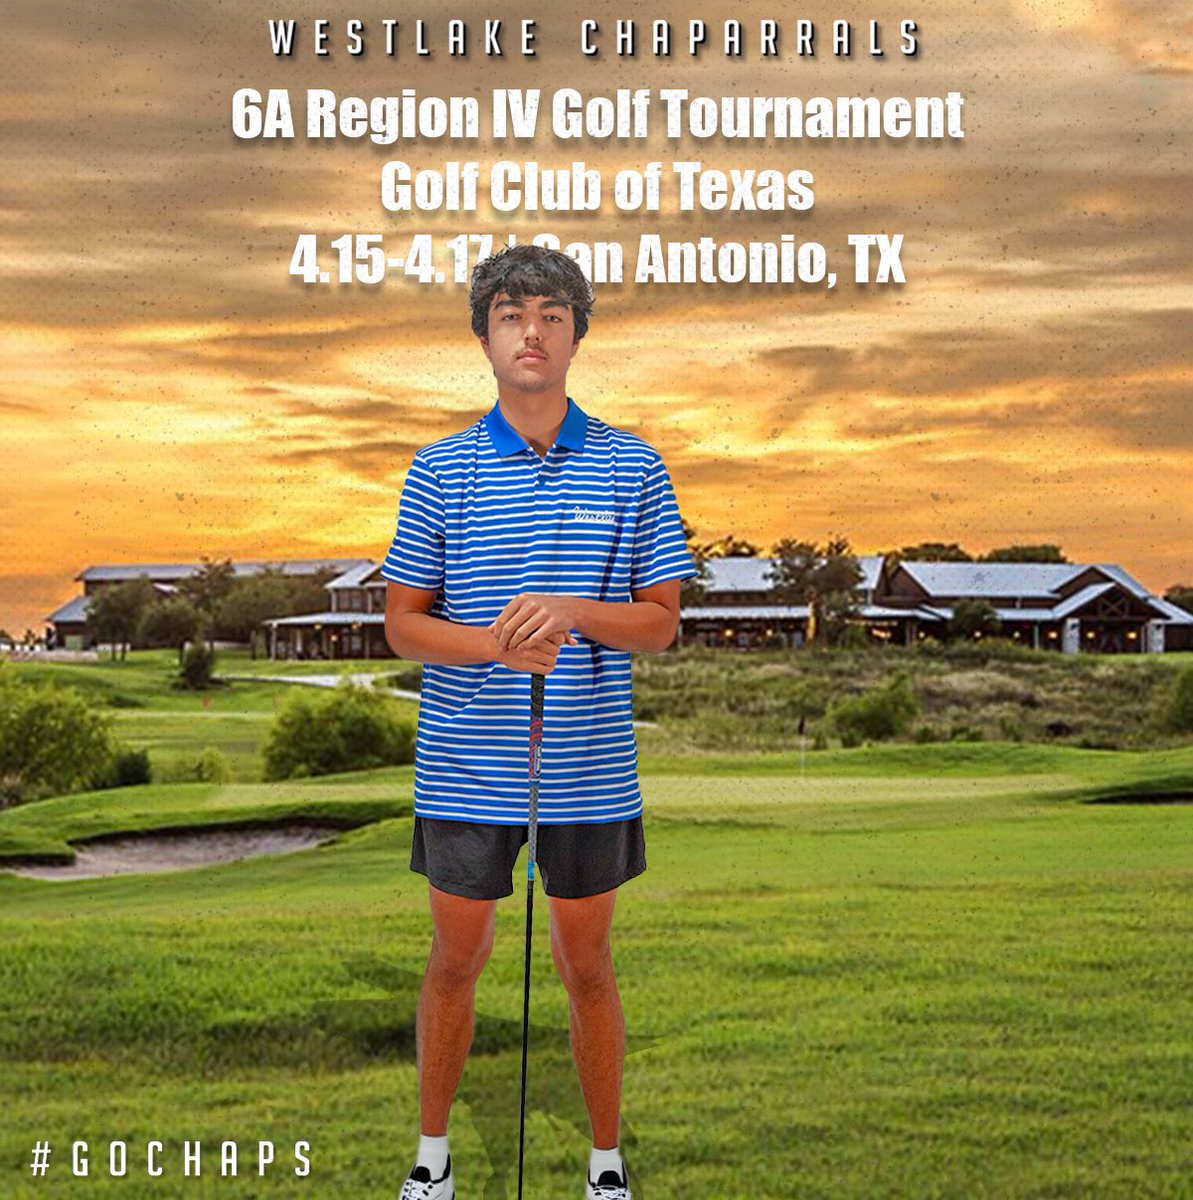 Men’s Golf is on the course at the Golf Club of Texas in San Antonio for round one of the 2024 6A Region Golf Tournament. The team features Adam Villanueva, Sterling Hurd, Blake Burt, Grant Yerger and Whit Bartlett. Danny Macias will compete as an individual. #GoChaps